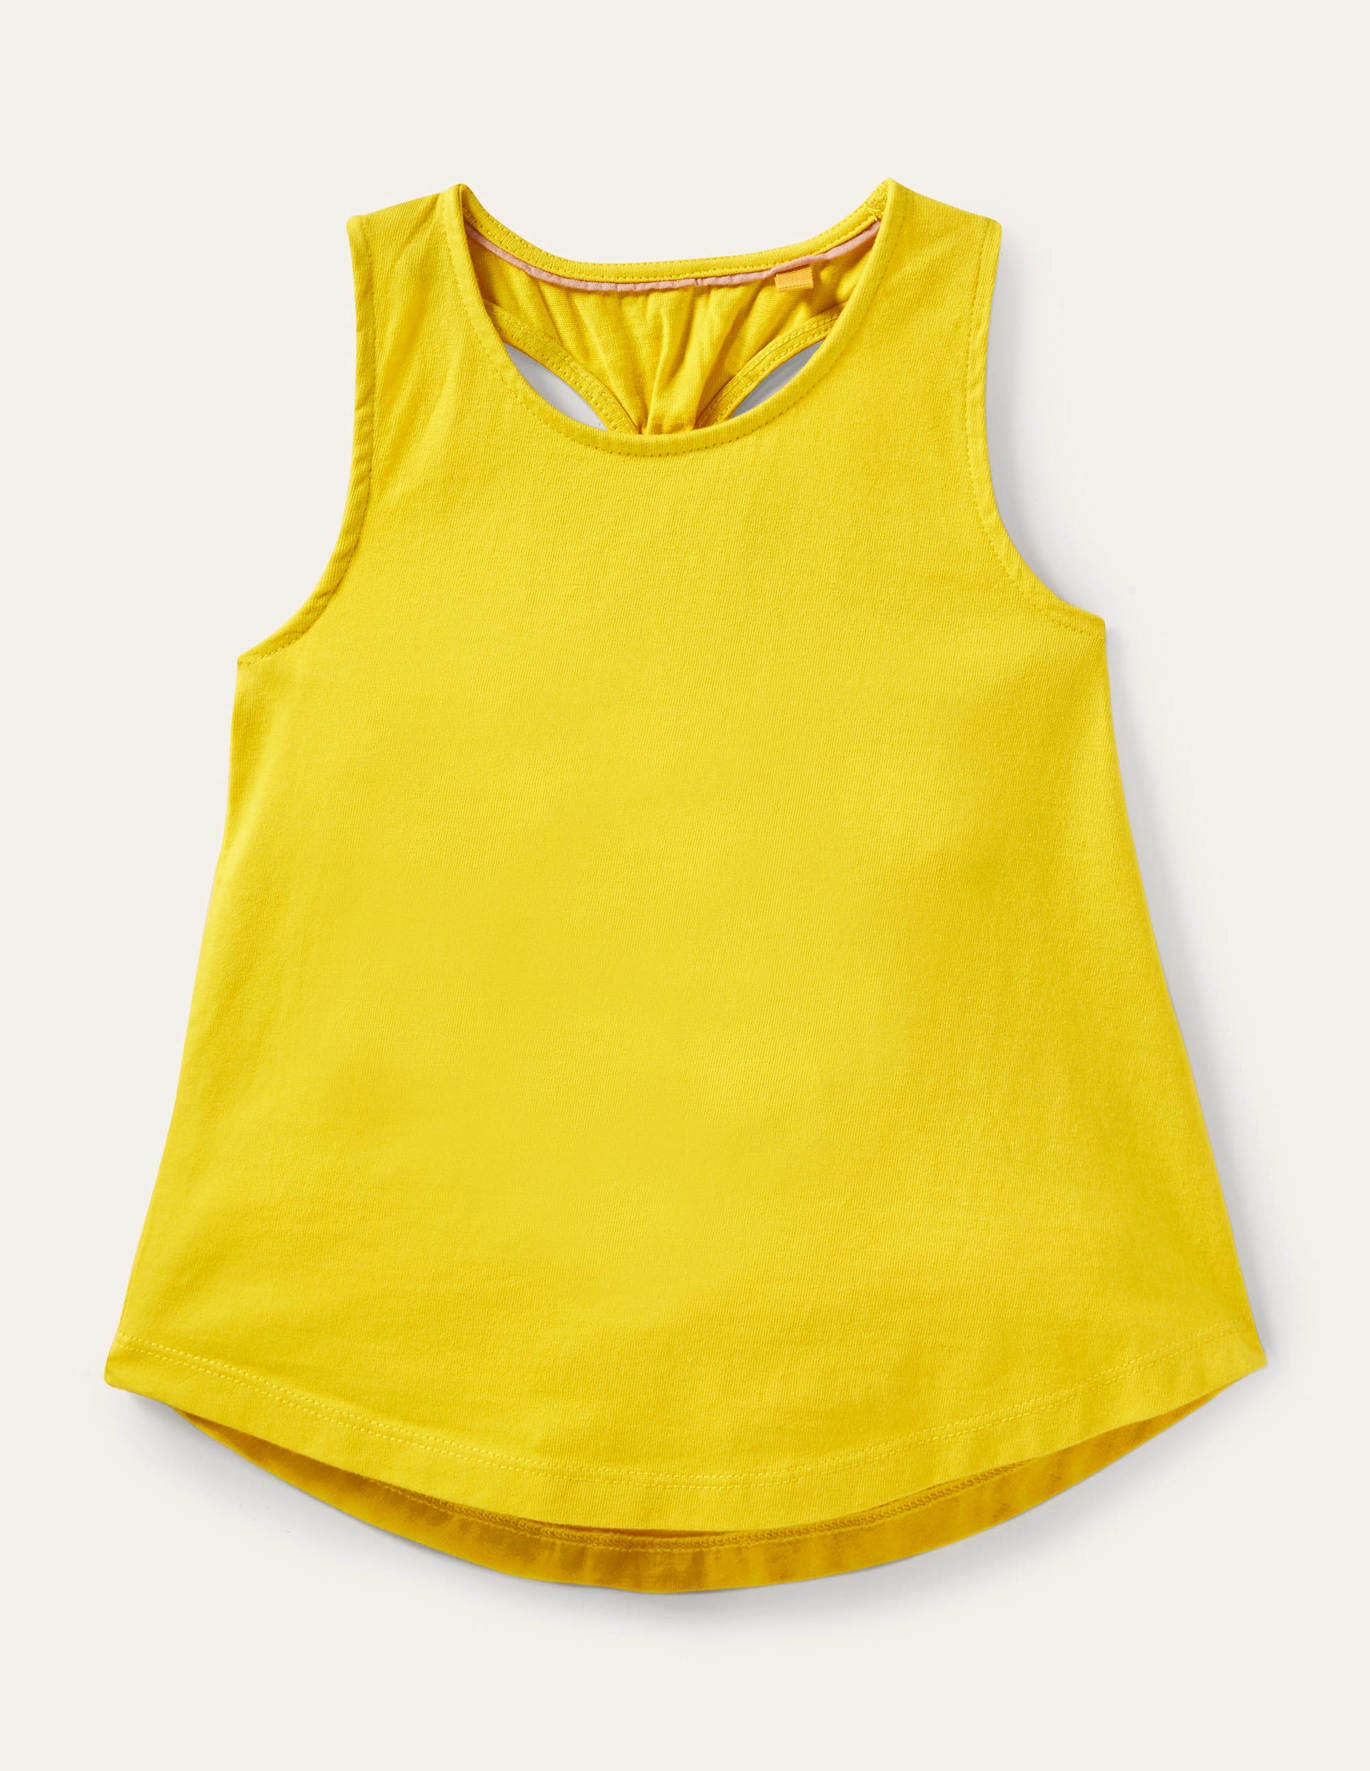 Boden Knot Back Racer Tank - Daffodil Yellow